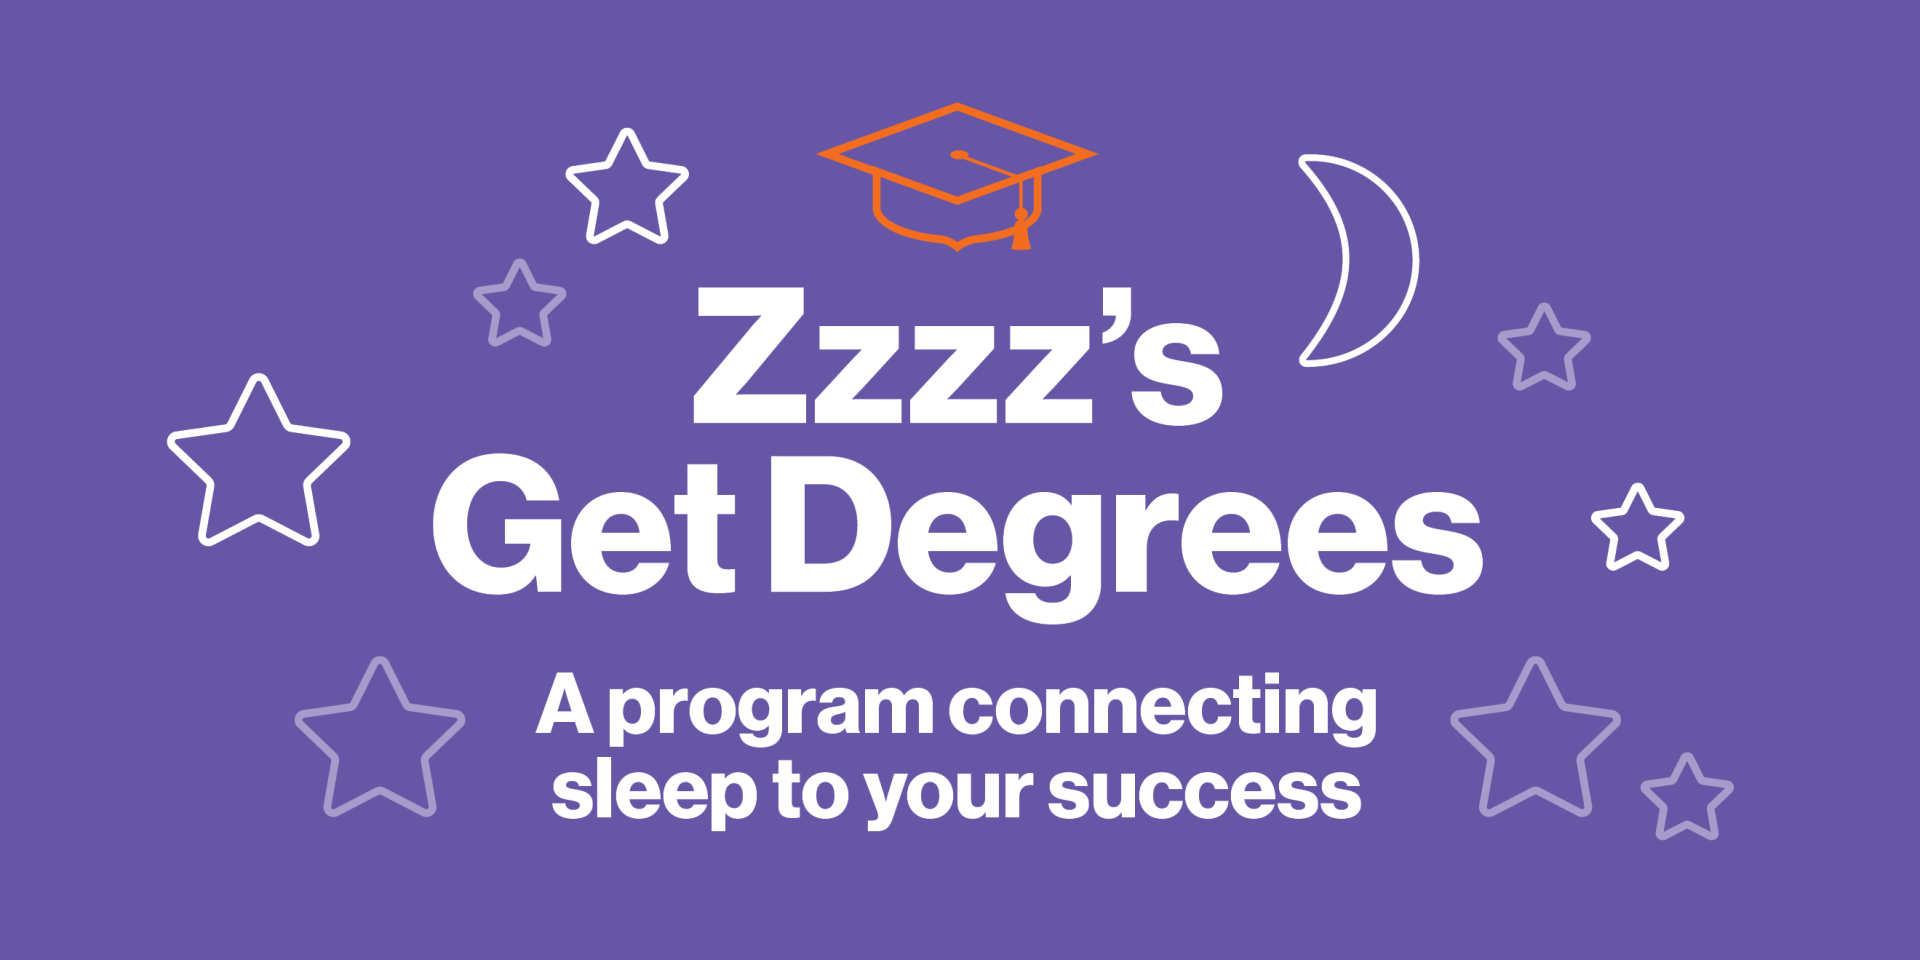 Zzz's Get Degrees: A program connecting sleep to your success.